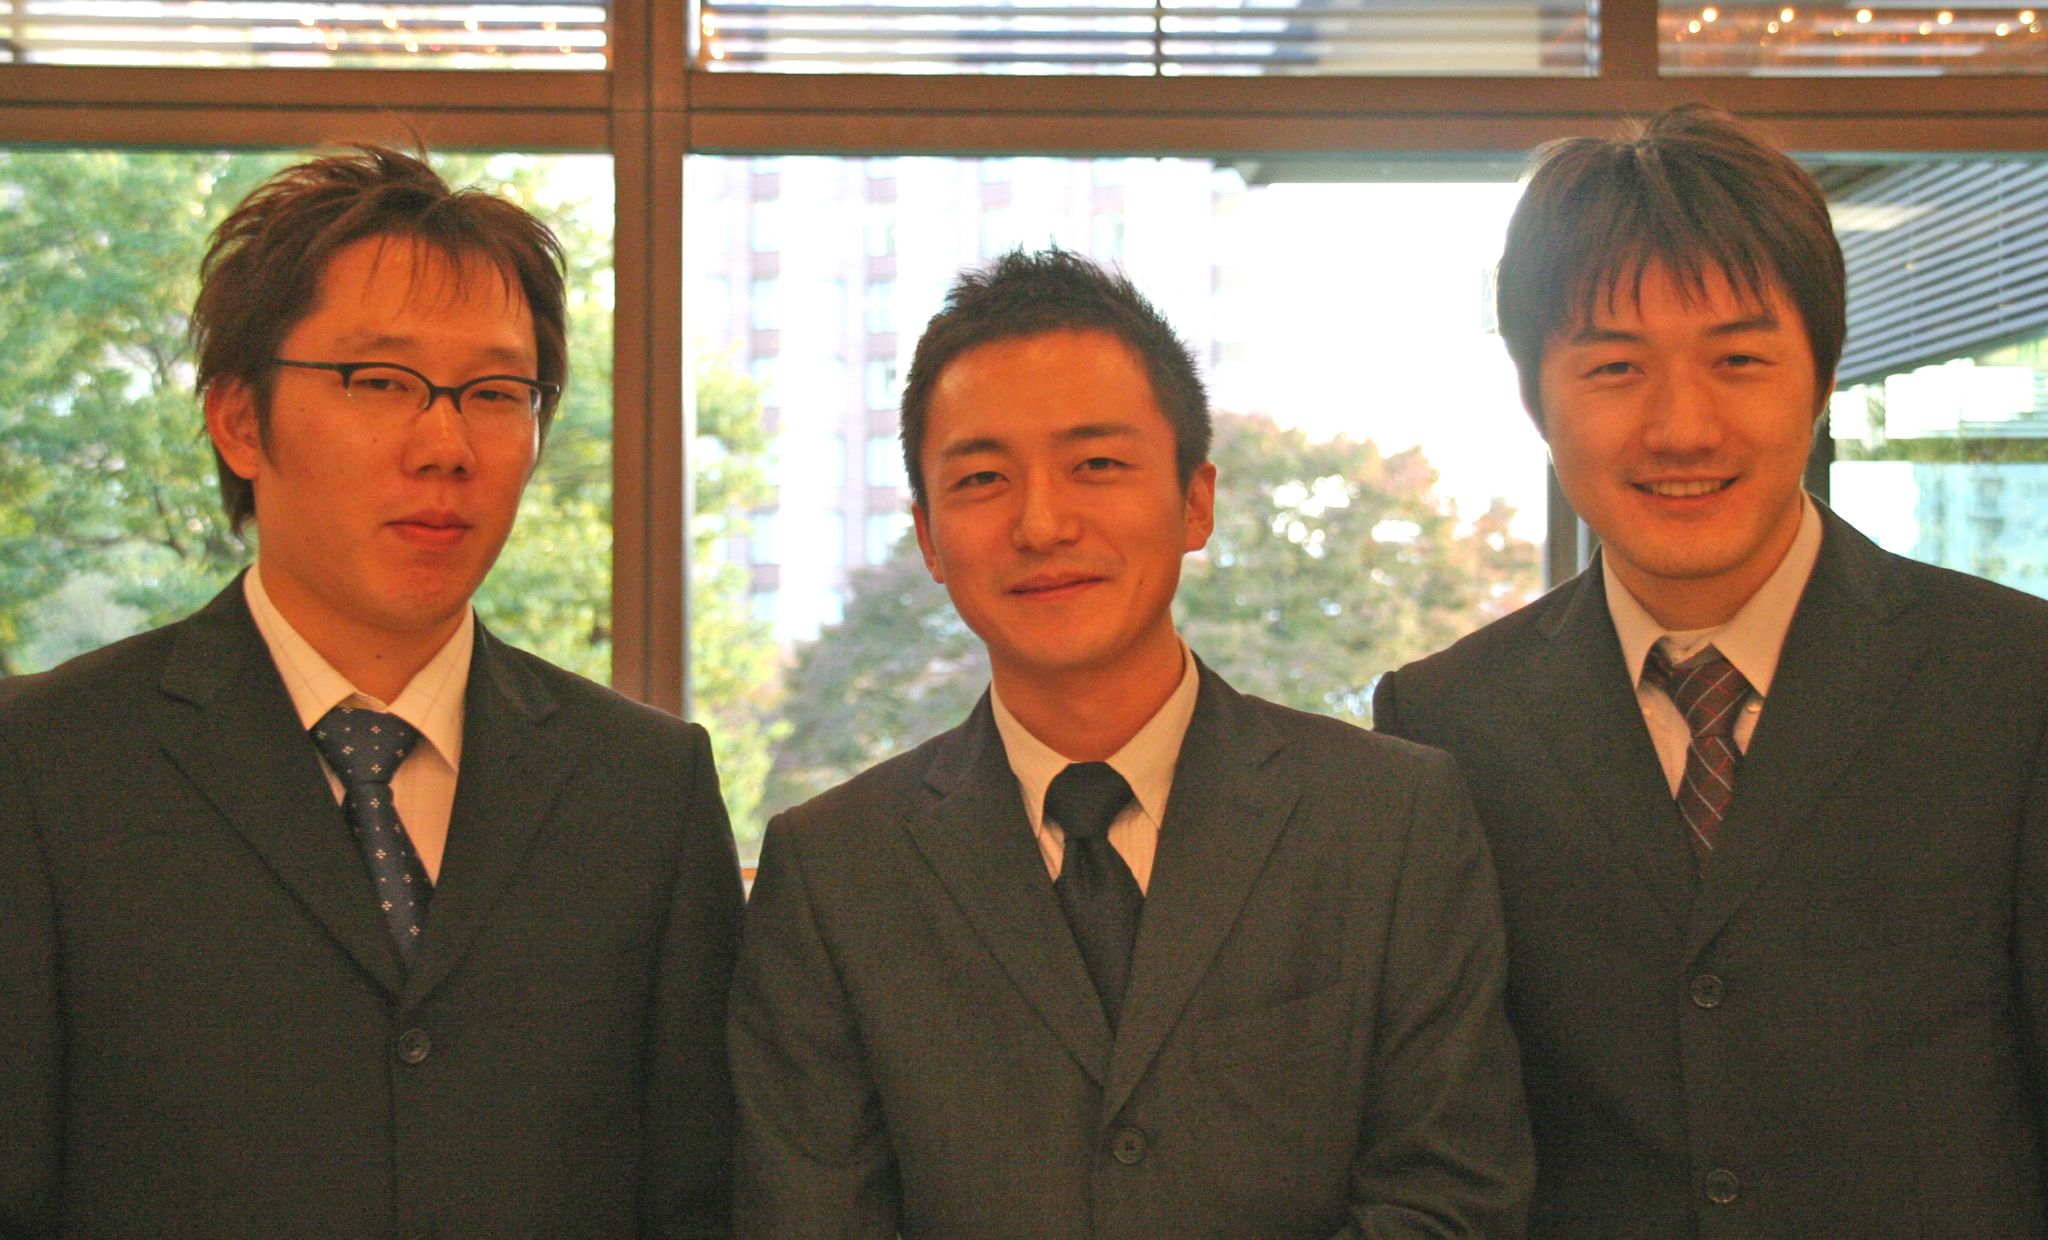 three asian men are wearing suits and ties